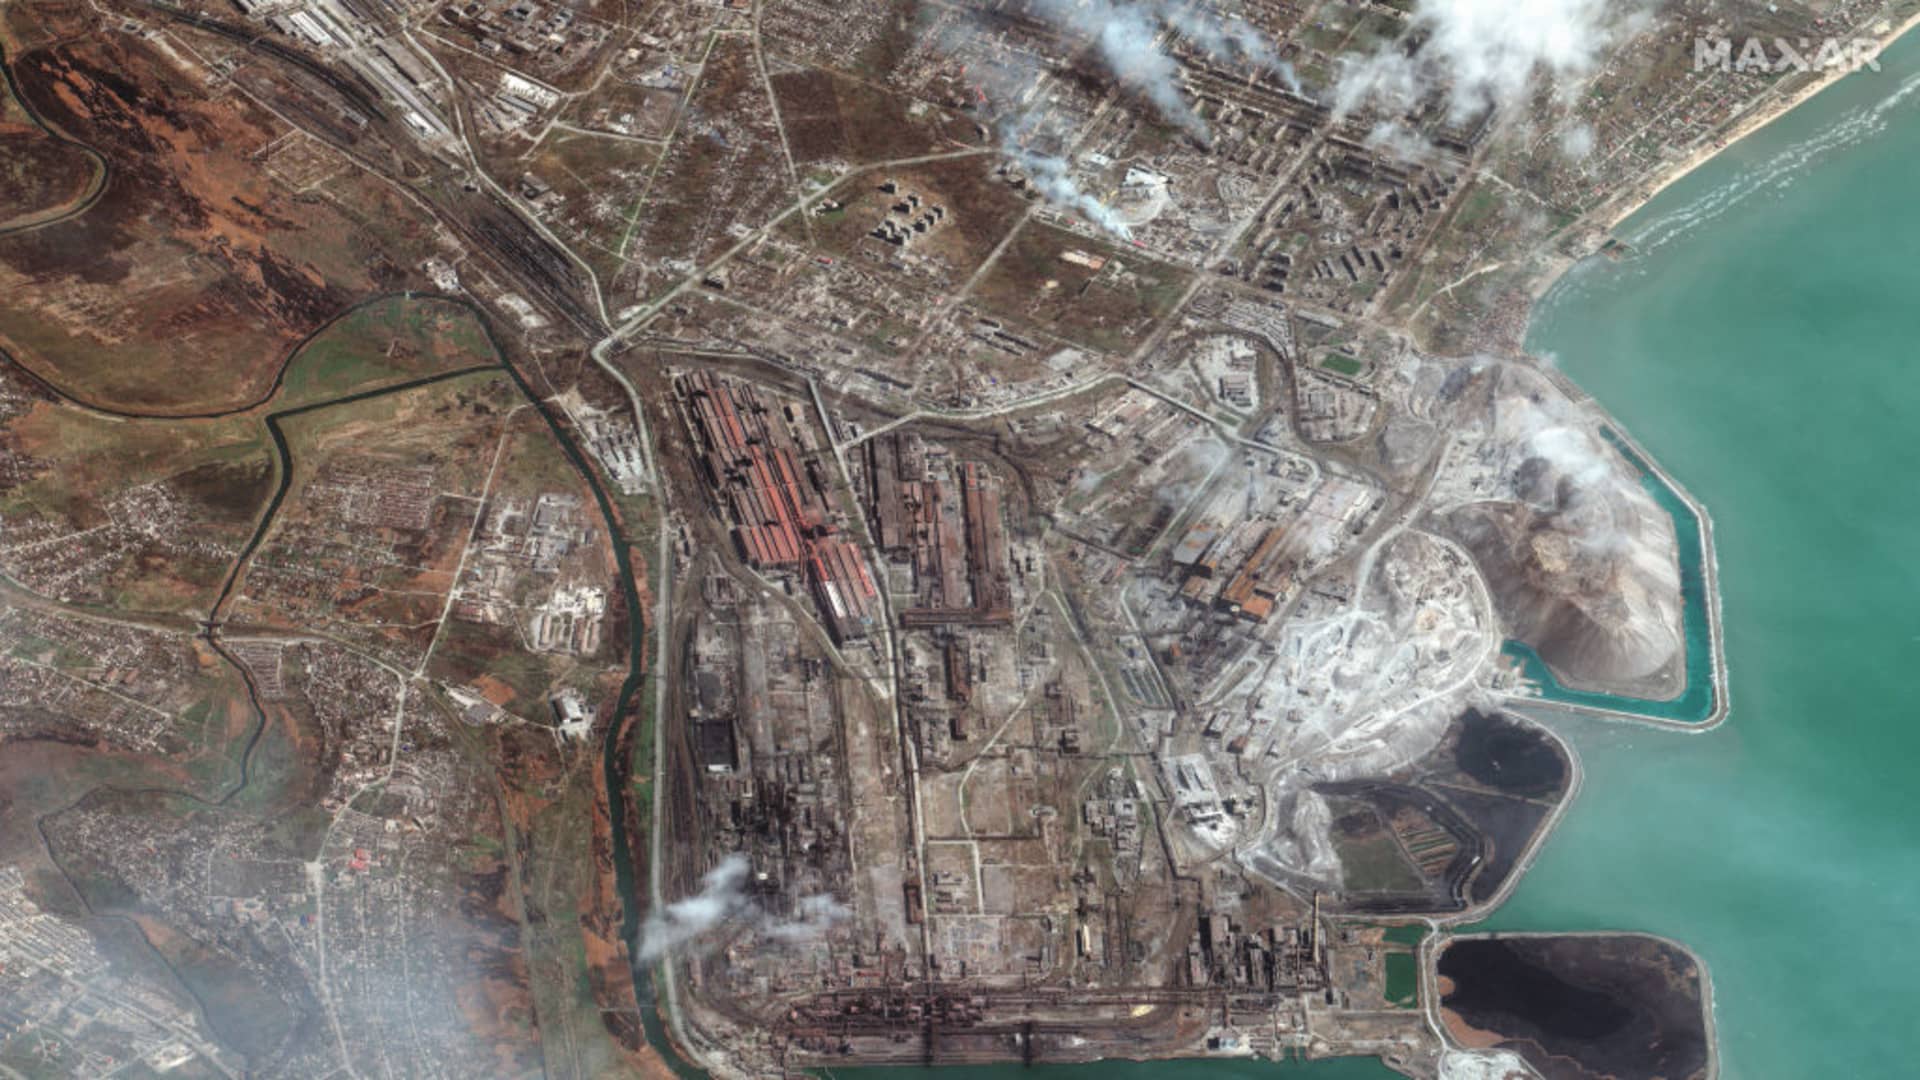 Maxar satellite imagery gives an overview of the Azovstal Iron and Steel Works in eastern Mariupol where Ukrainian fighters are believed to be holding out against a Russian takeover of the southern port city.